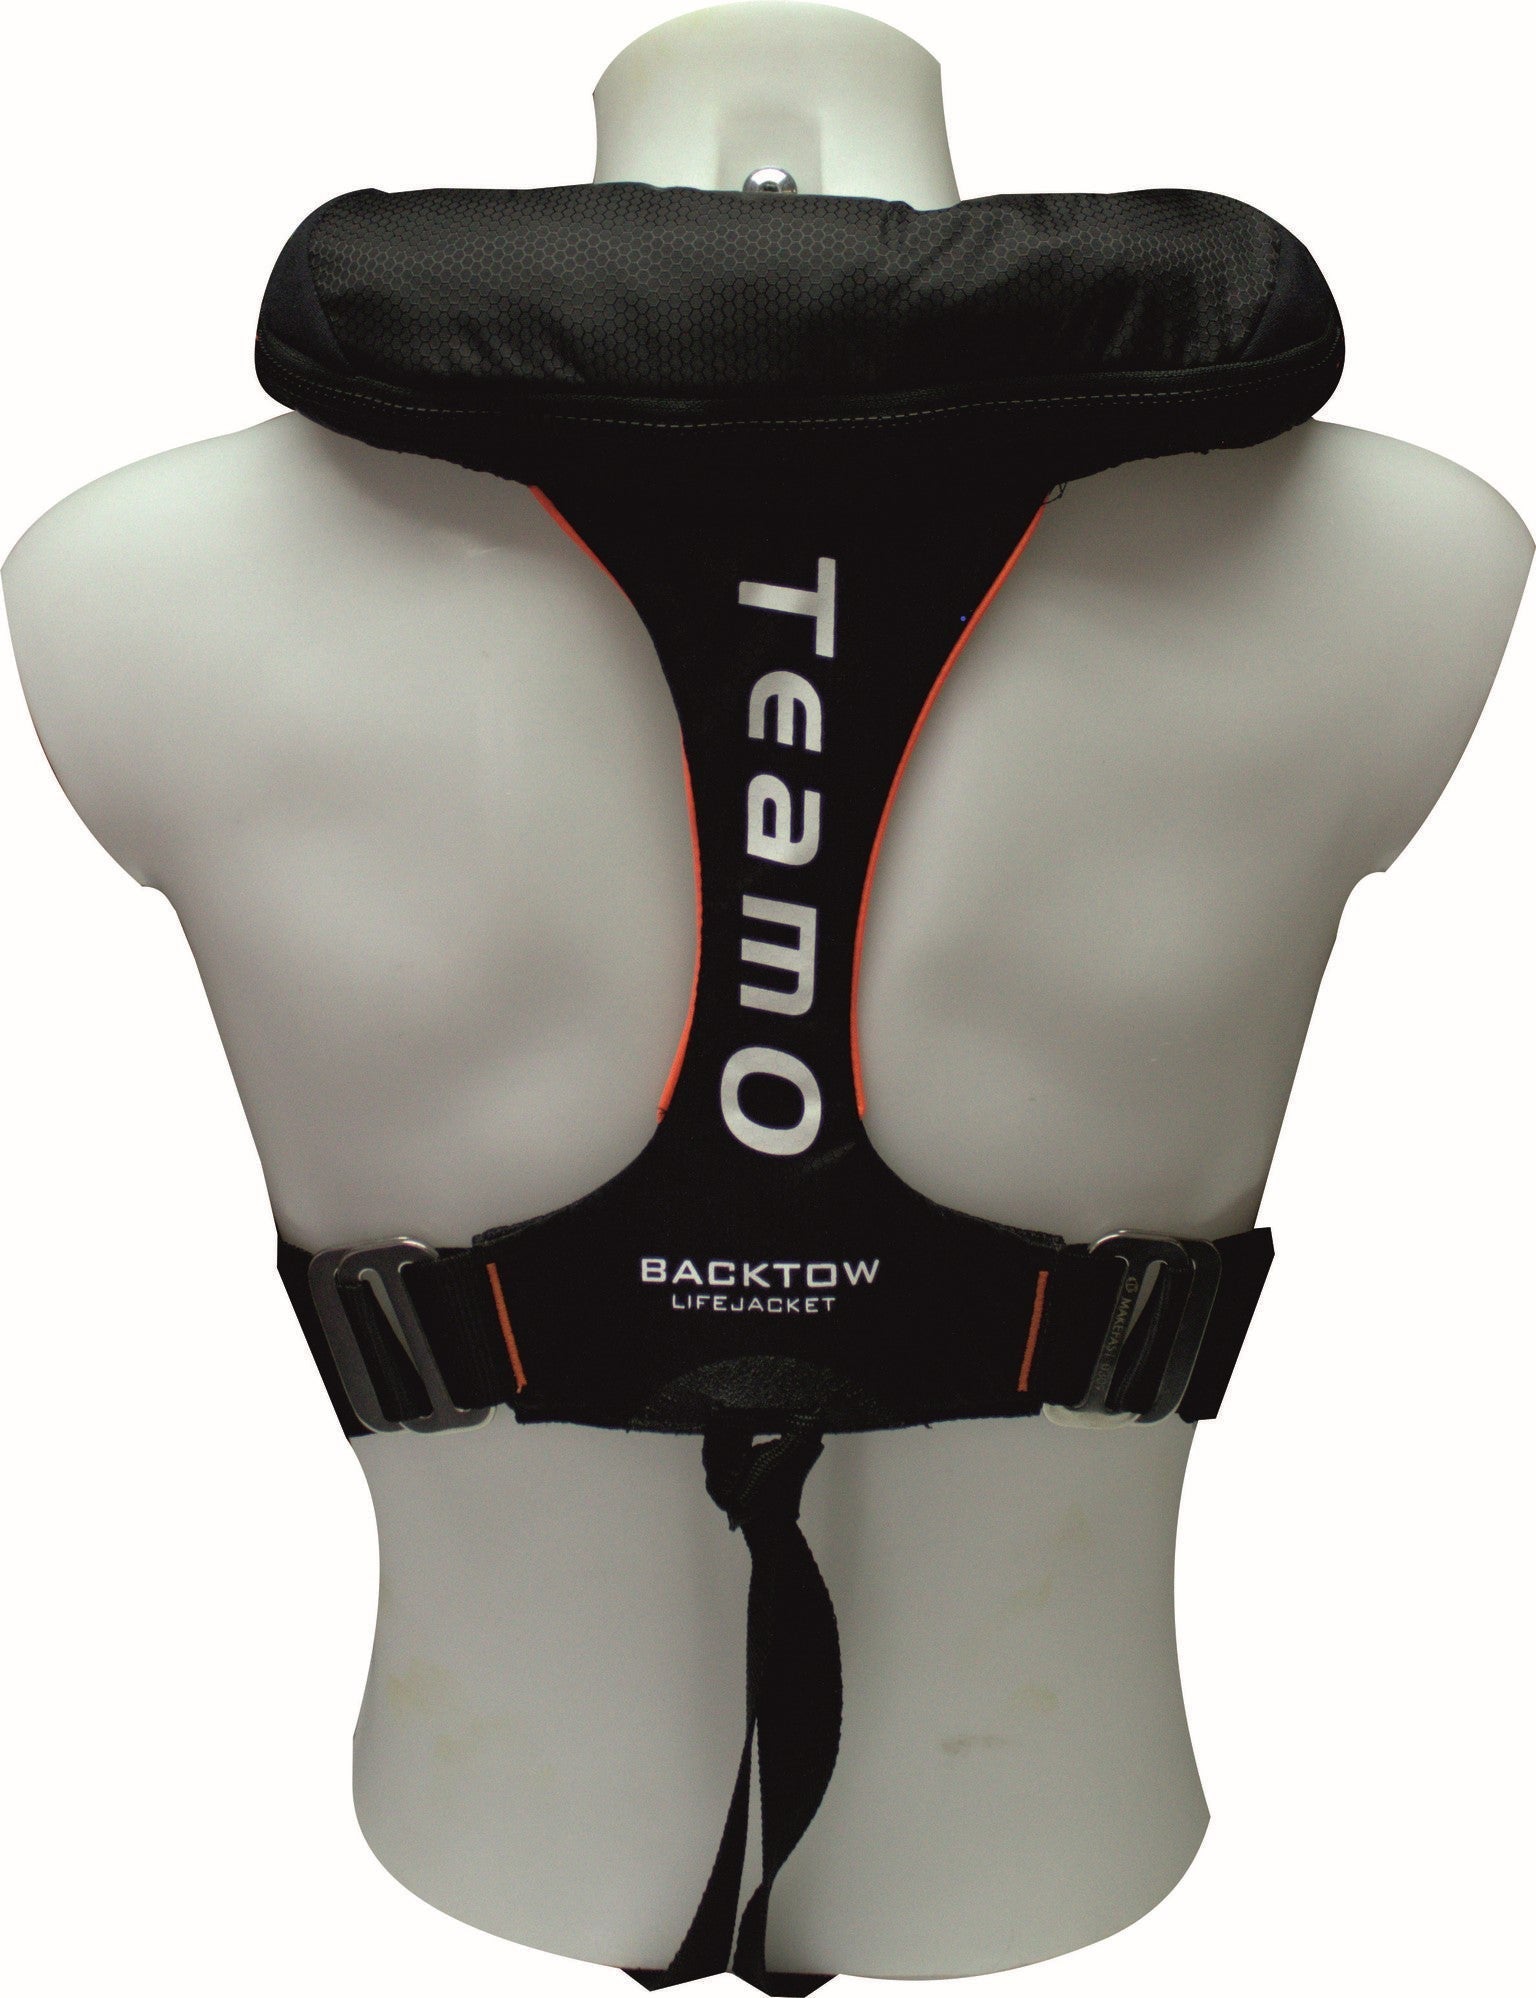 TeamO inflatable PFD from back